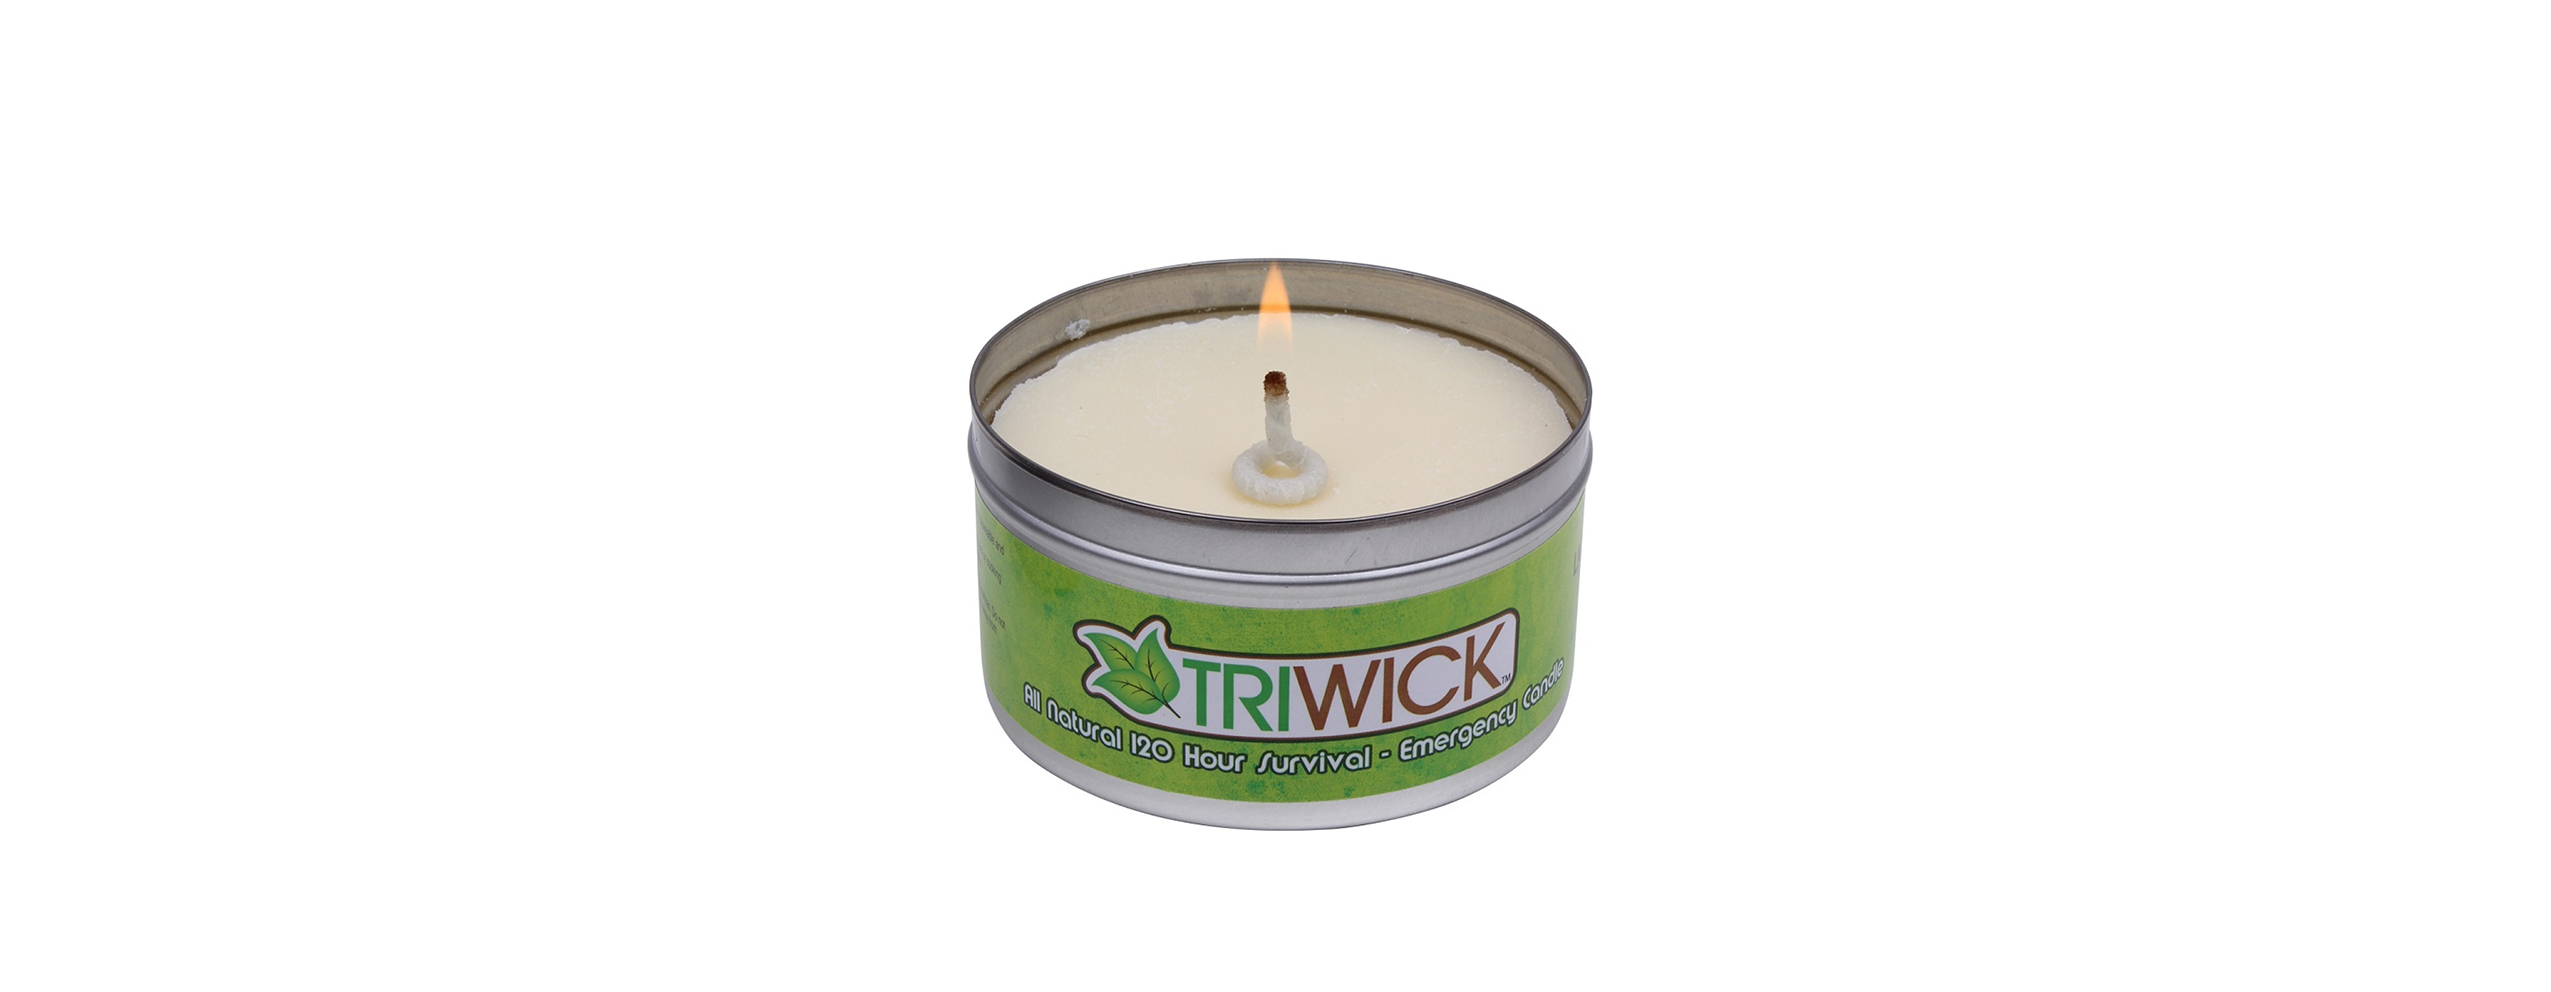 Triwick 120-hour Survival Candle/Camping Stove